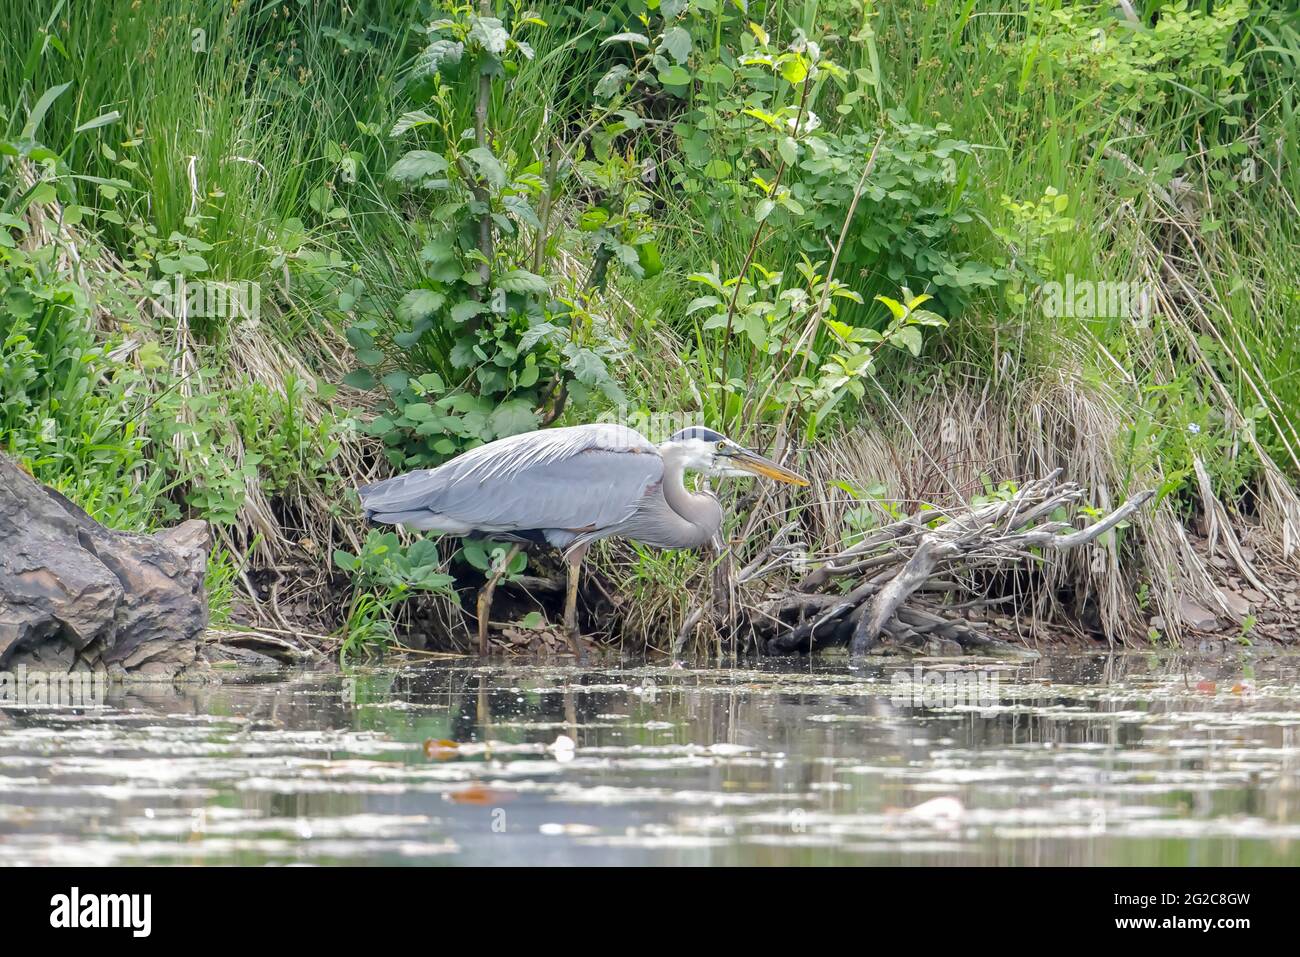 A great blue heron is wading in the water searching for fish in a lake near Coeur d'Alene, Idaho. Stock Photo